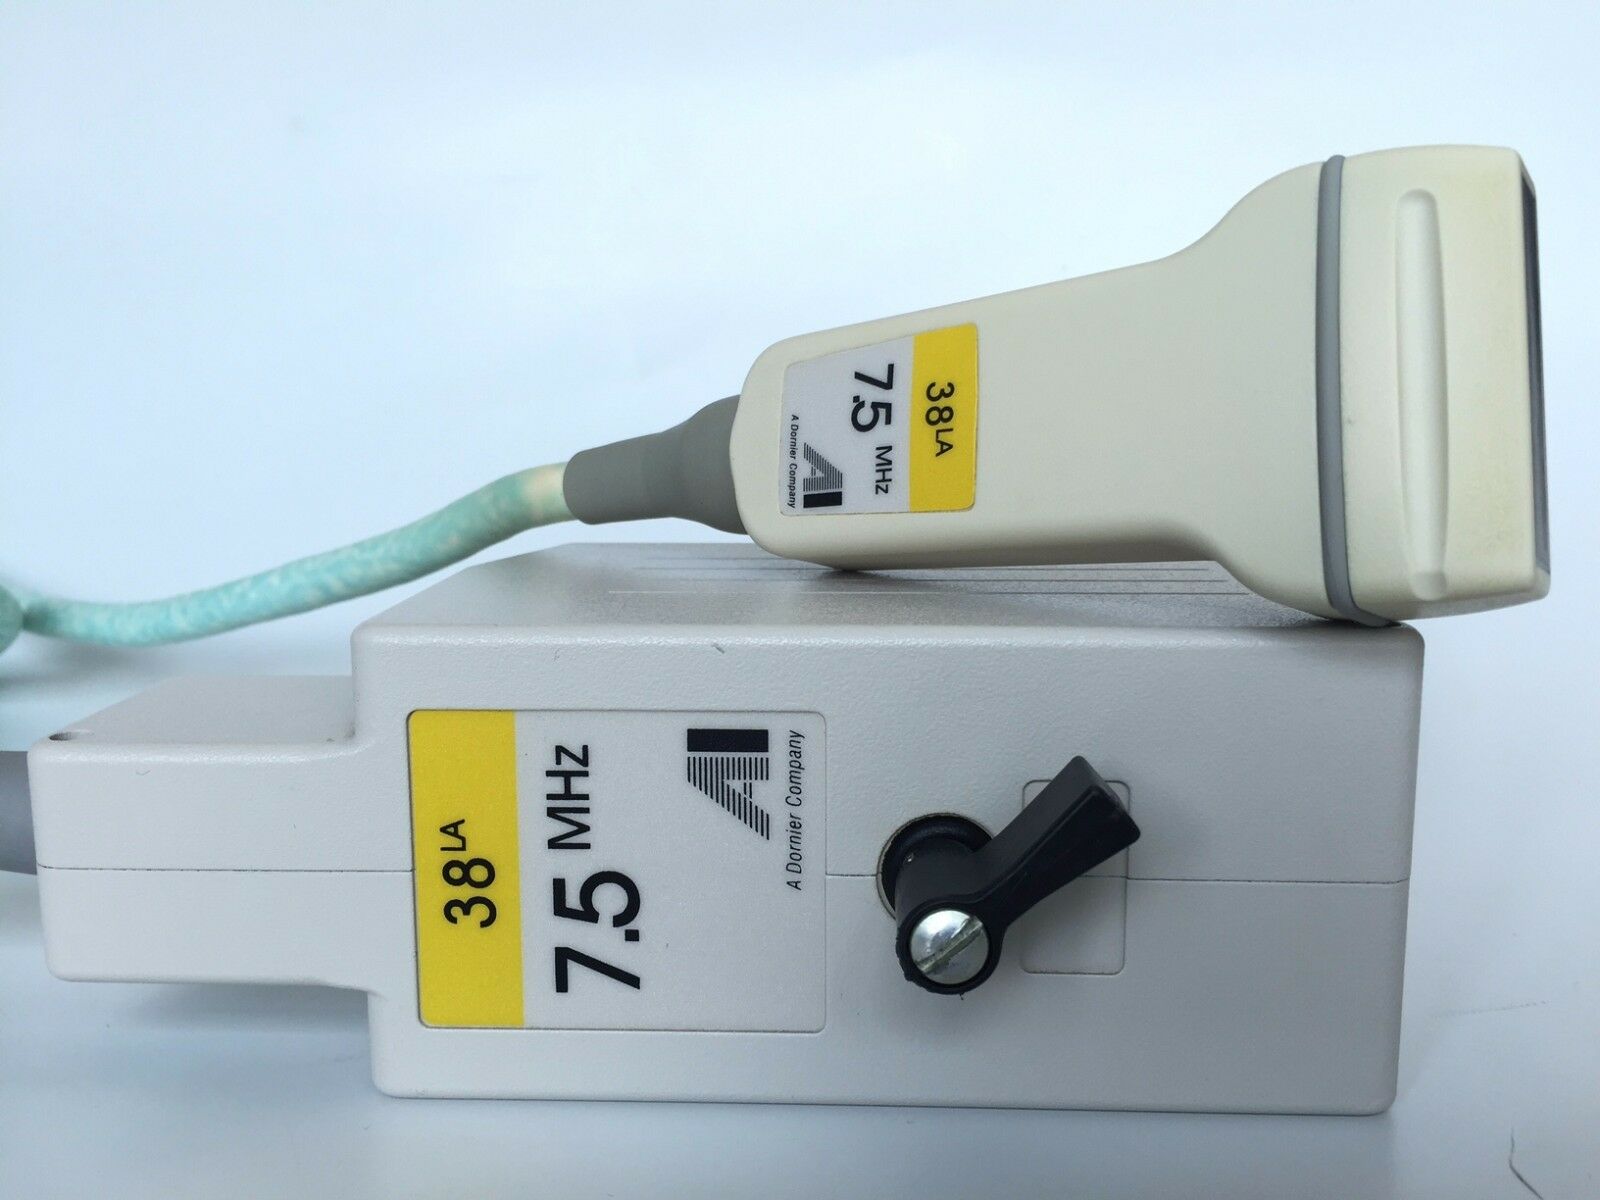 ACOUSTIC IMAGING 38LA 7.5 MHz.ULTRASOUND TRANSDUCER PROBE Used ~ full-tested DIAGNOSTIC ULTRASOUND MACHINES FOR SALE